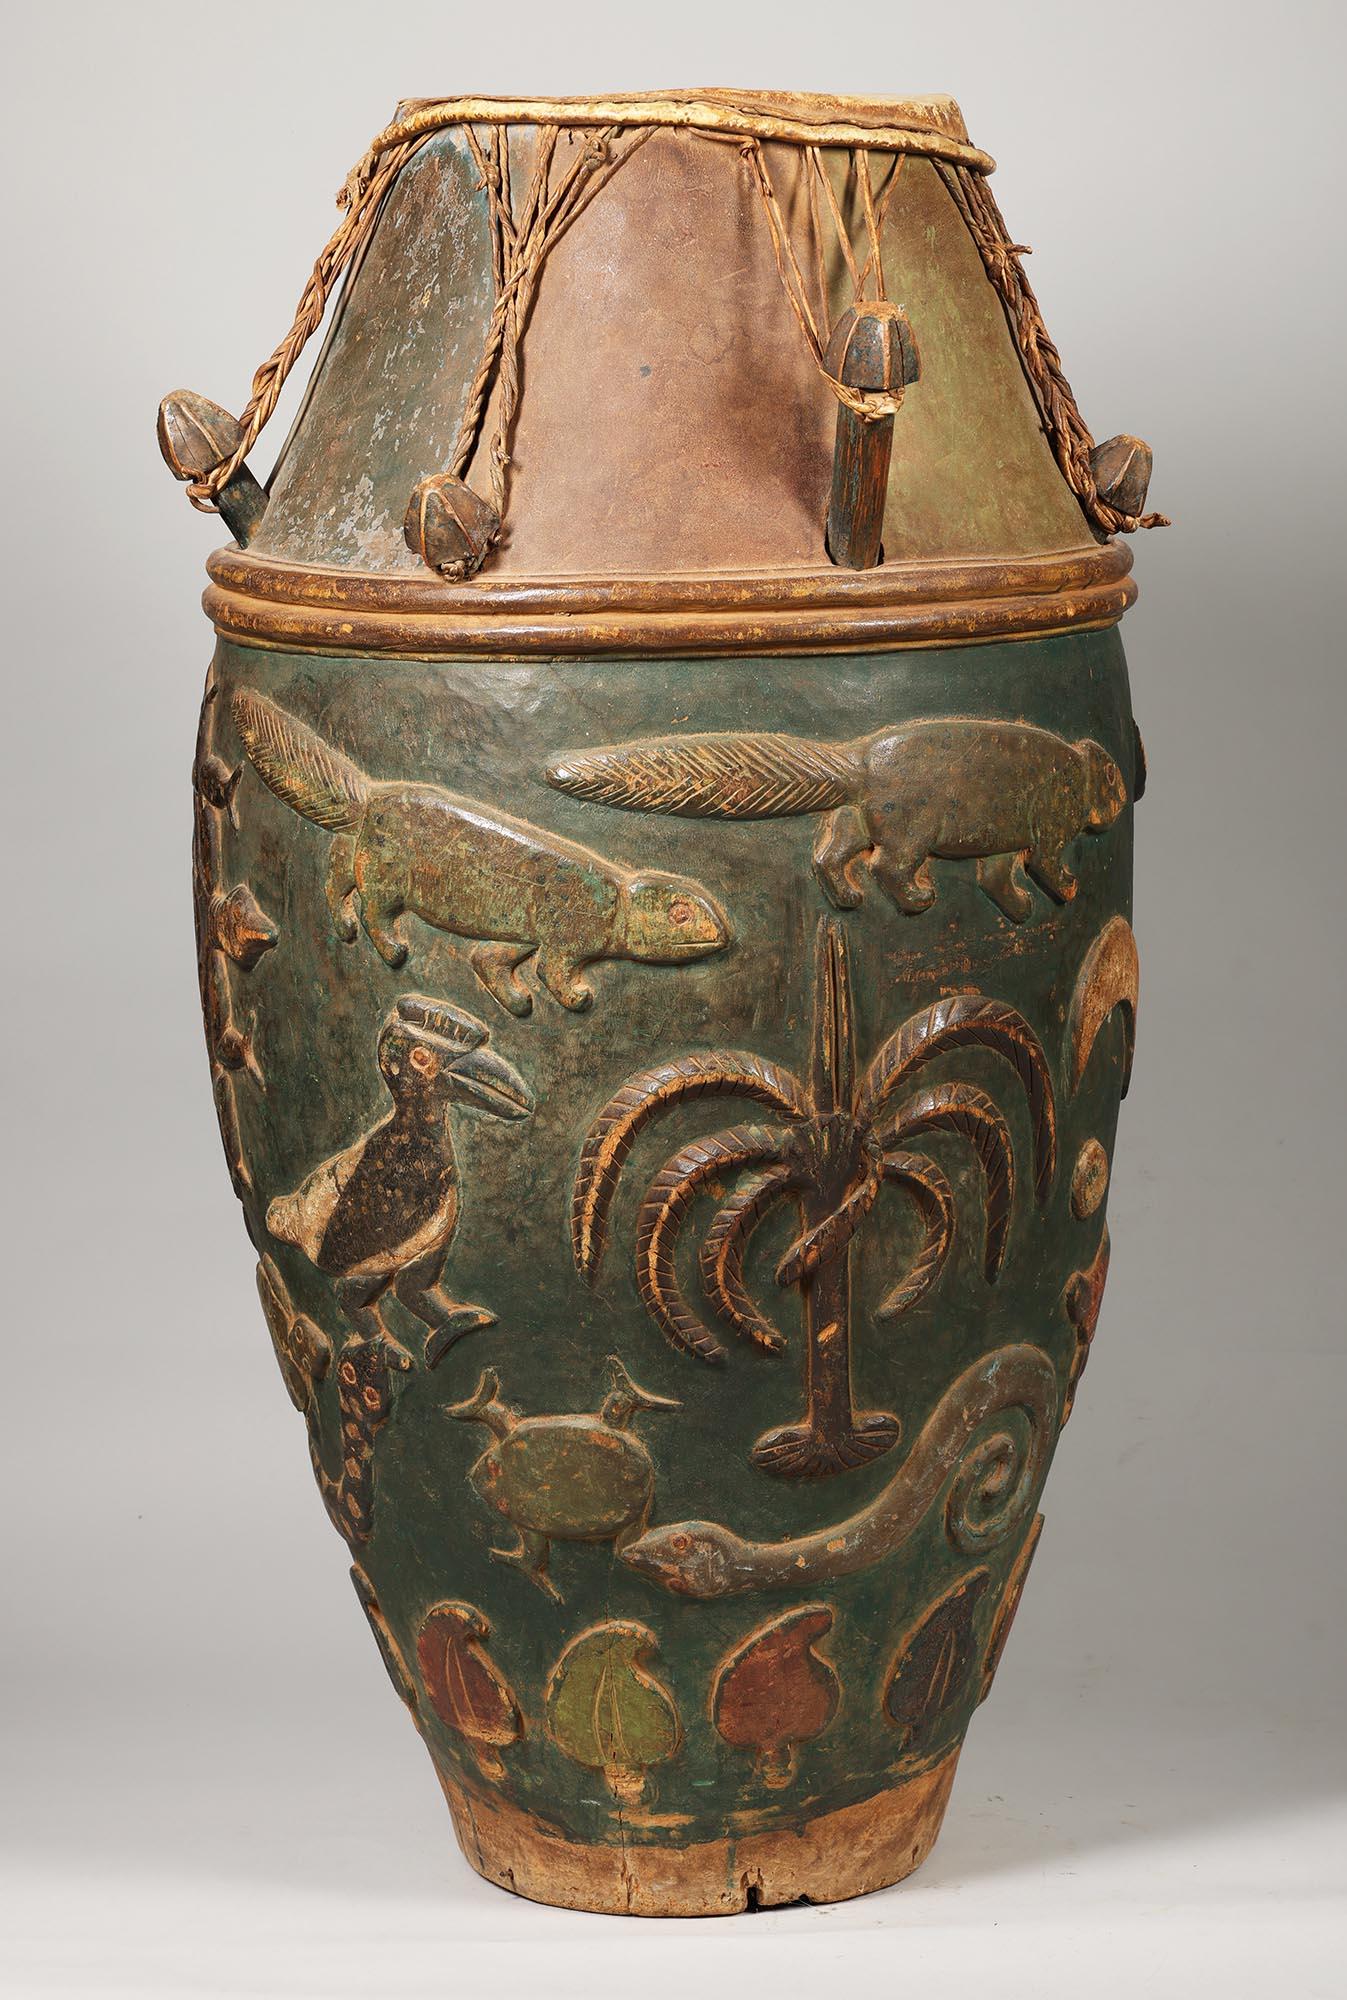 Early Large Ashanti Polychrome Mother Drum, Ghana early 20th century Osei Bonsu For Sale 5